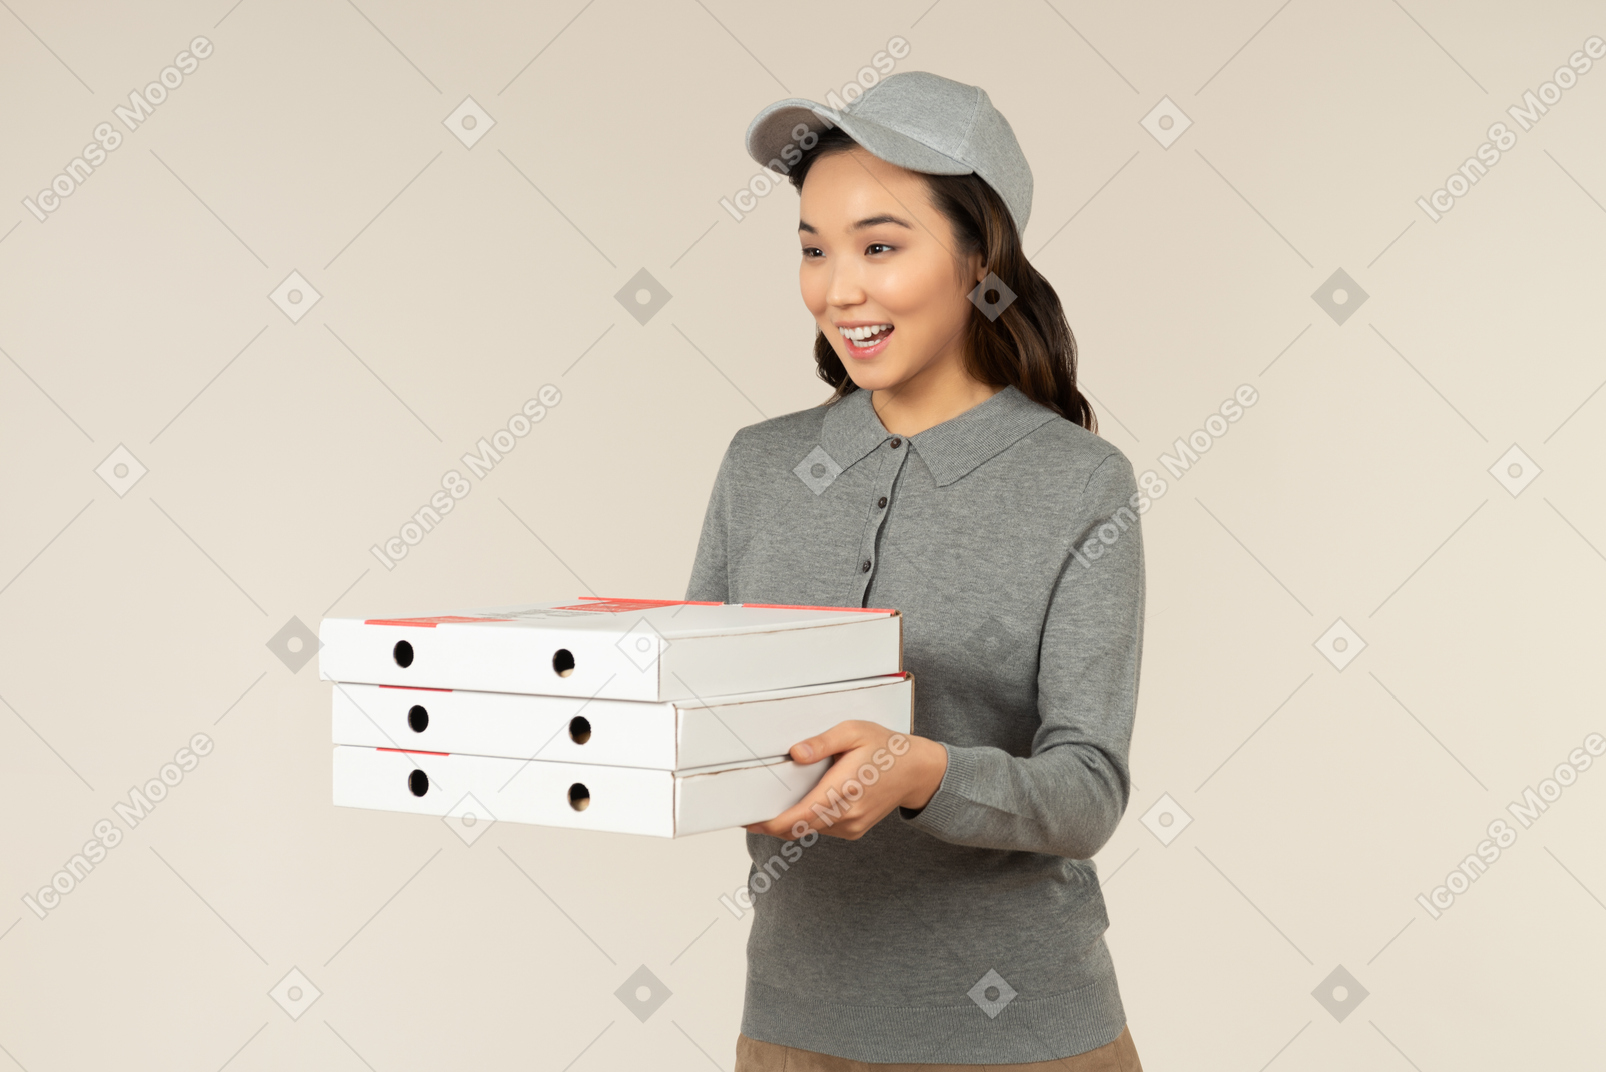 Pizza order is here